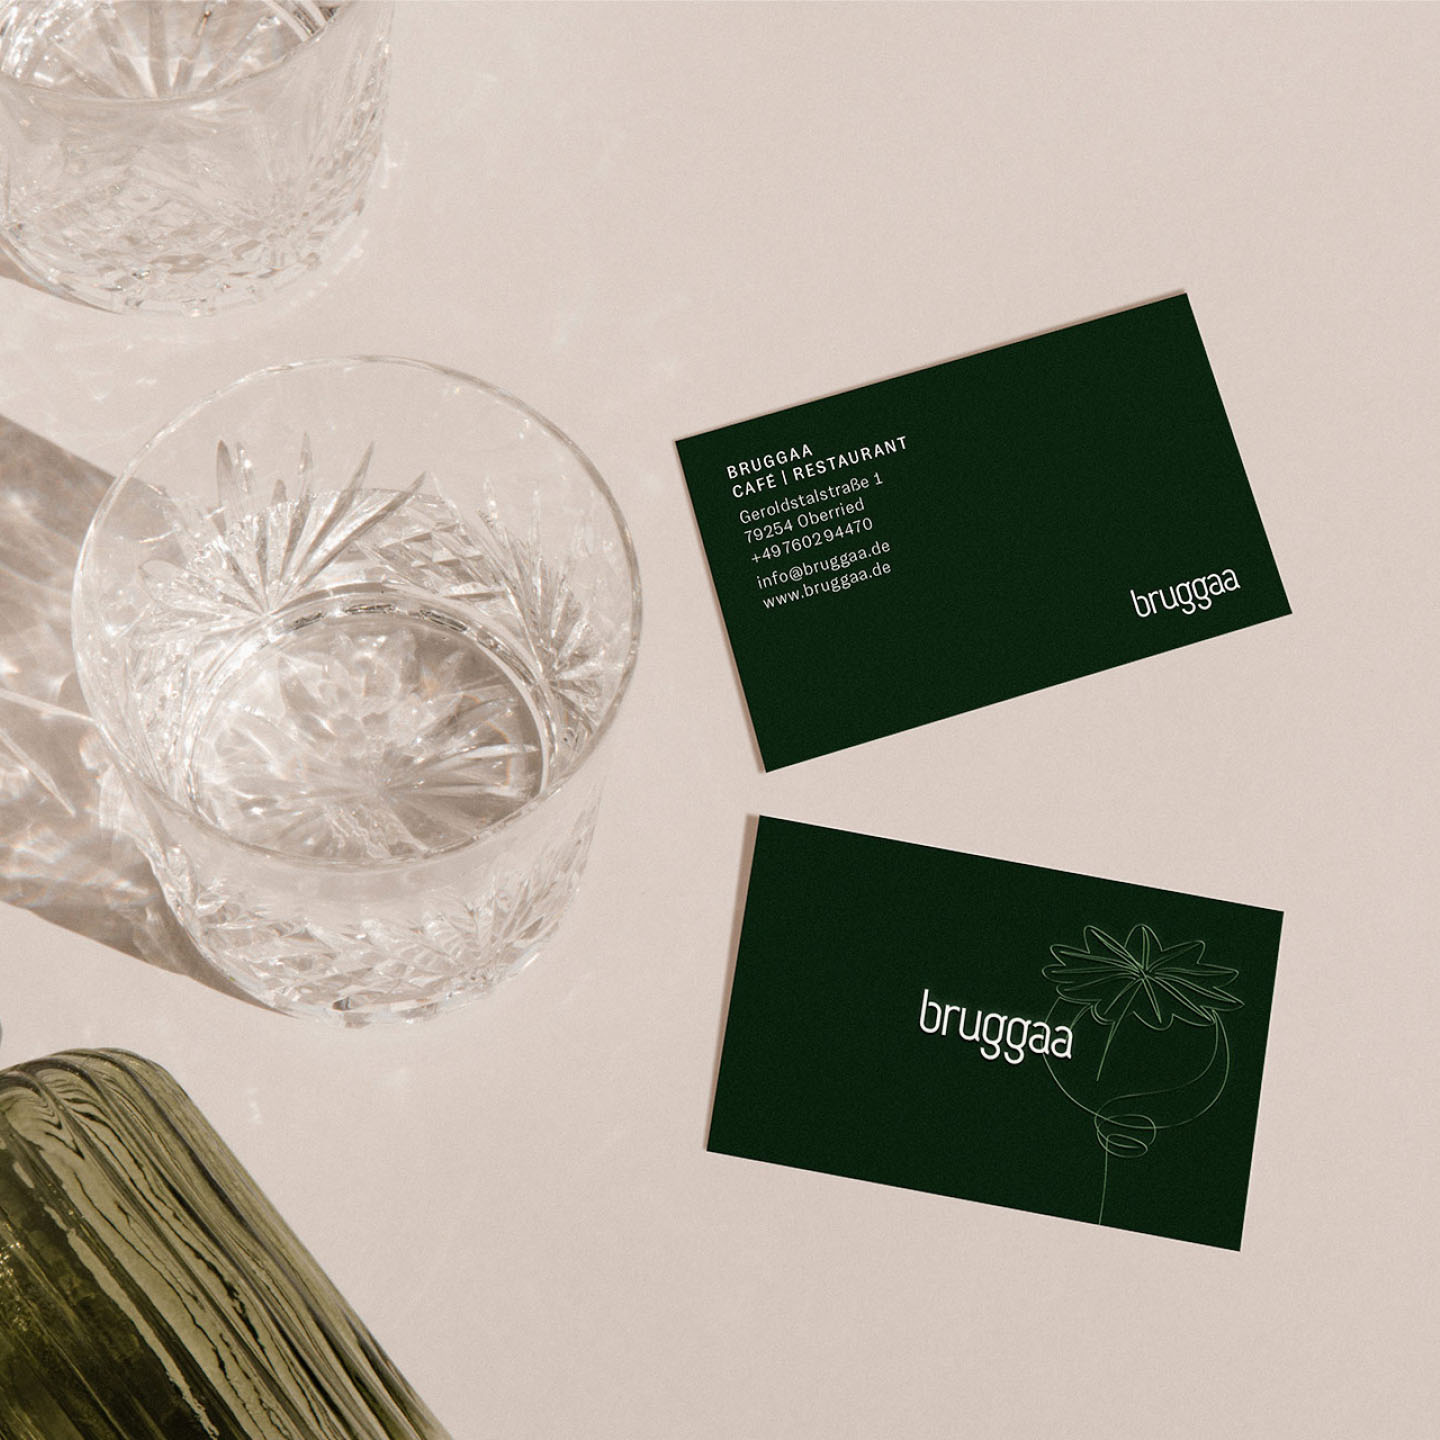 bright photography of various glasses and two business cards with a continuous line illustration of poppy